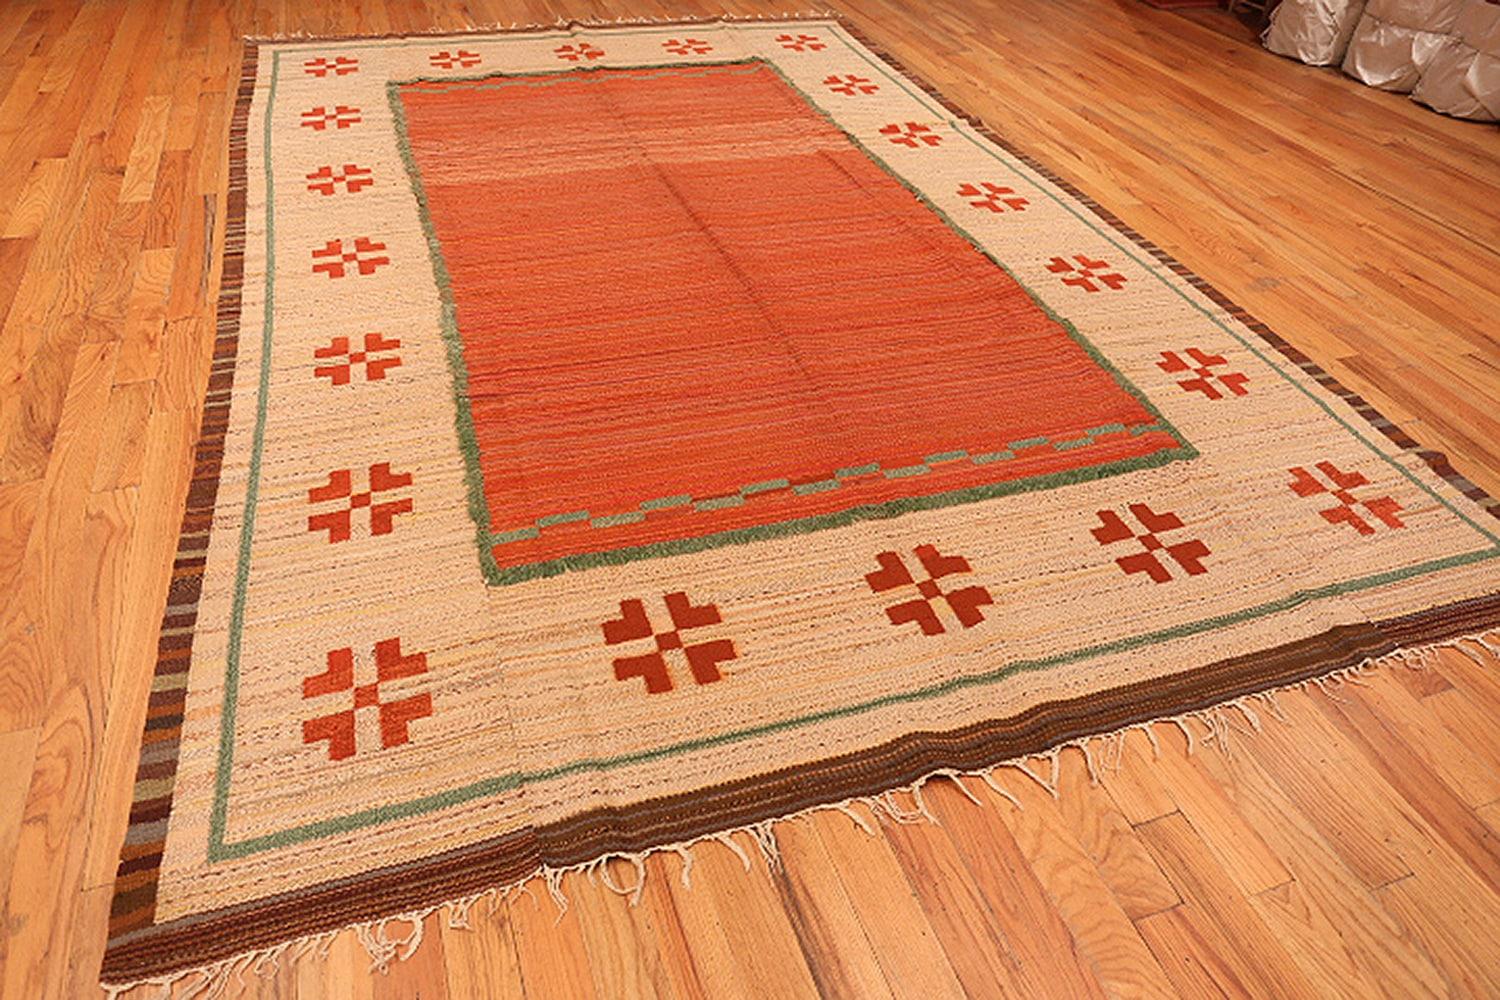 Vintage Scandinavian Swedish Kilim, country of origin: Sweden, date circa midcentury. Size: 7 ft. 10 in x 12 ft. (2.39 m x 3.66 m)

This idyllic midcentury Scandinavian rug captures the colors and style of this chic, fashion-forward era. Ivory,